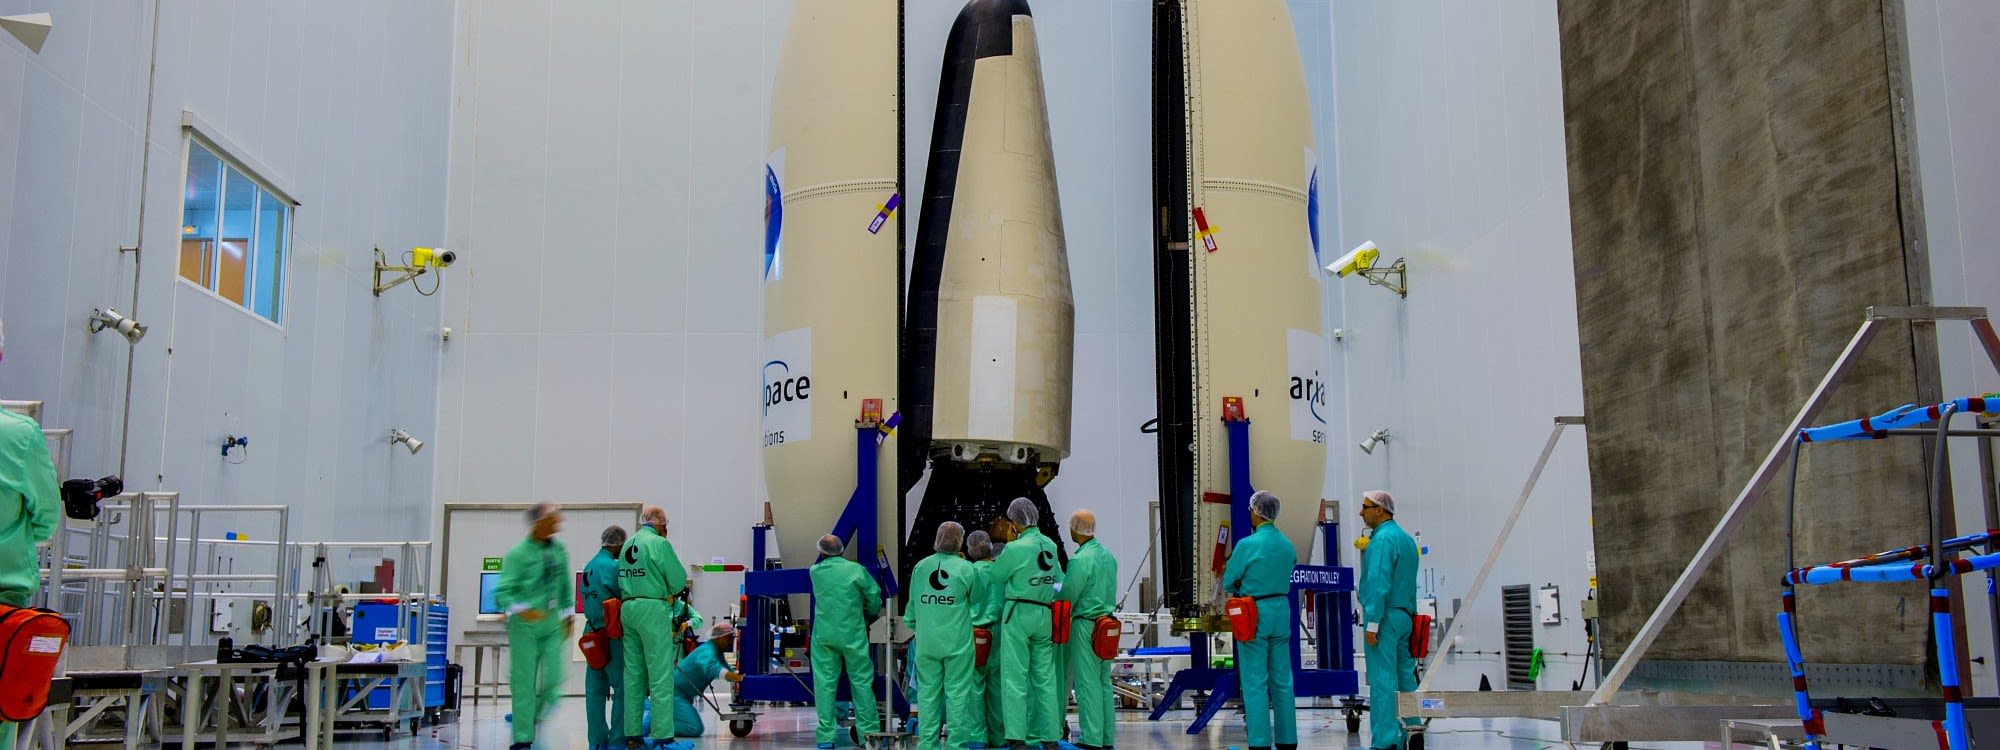 The European space agency’s (ESA) IXV demonstrator which has flown in February 2015, and in which Dassault Aviation is involved in aerodynamics and aerothermodynamics